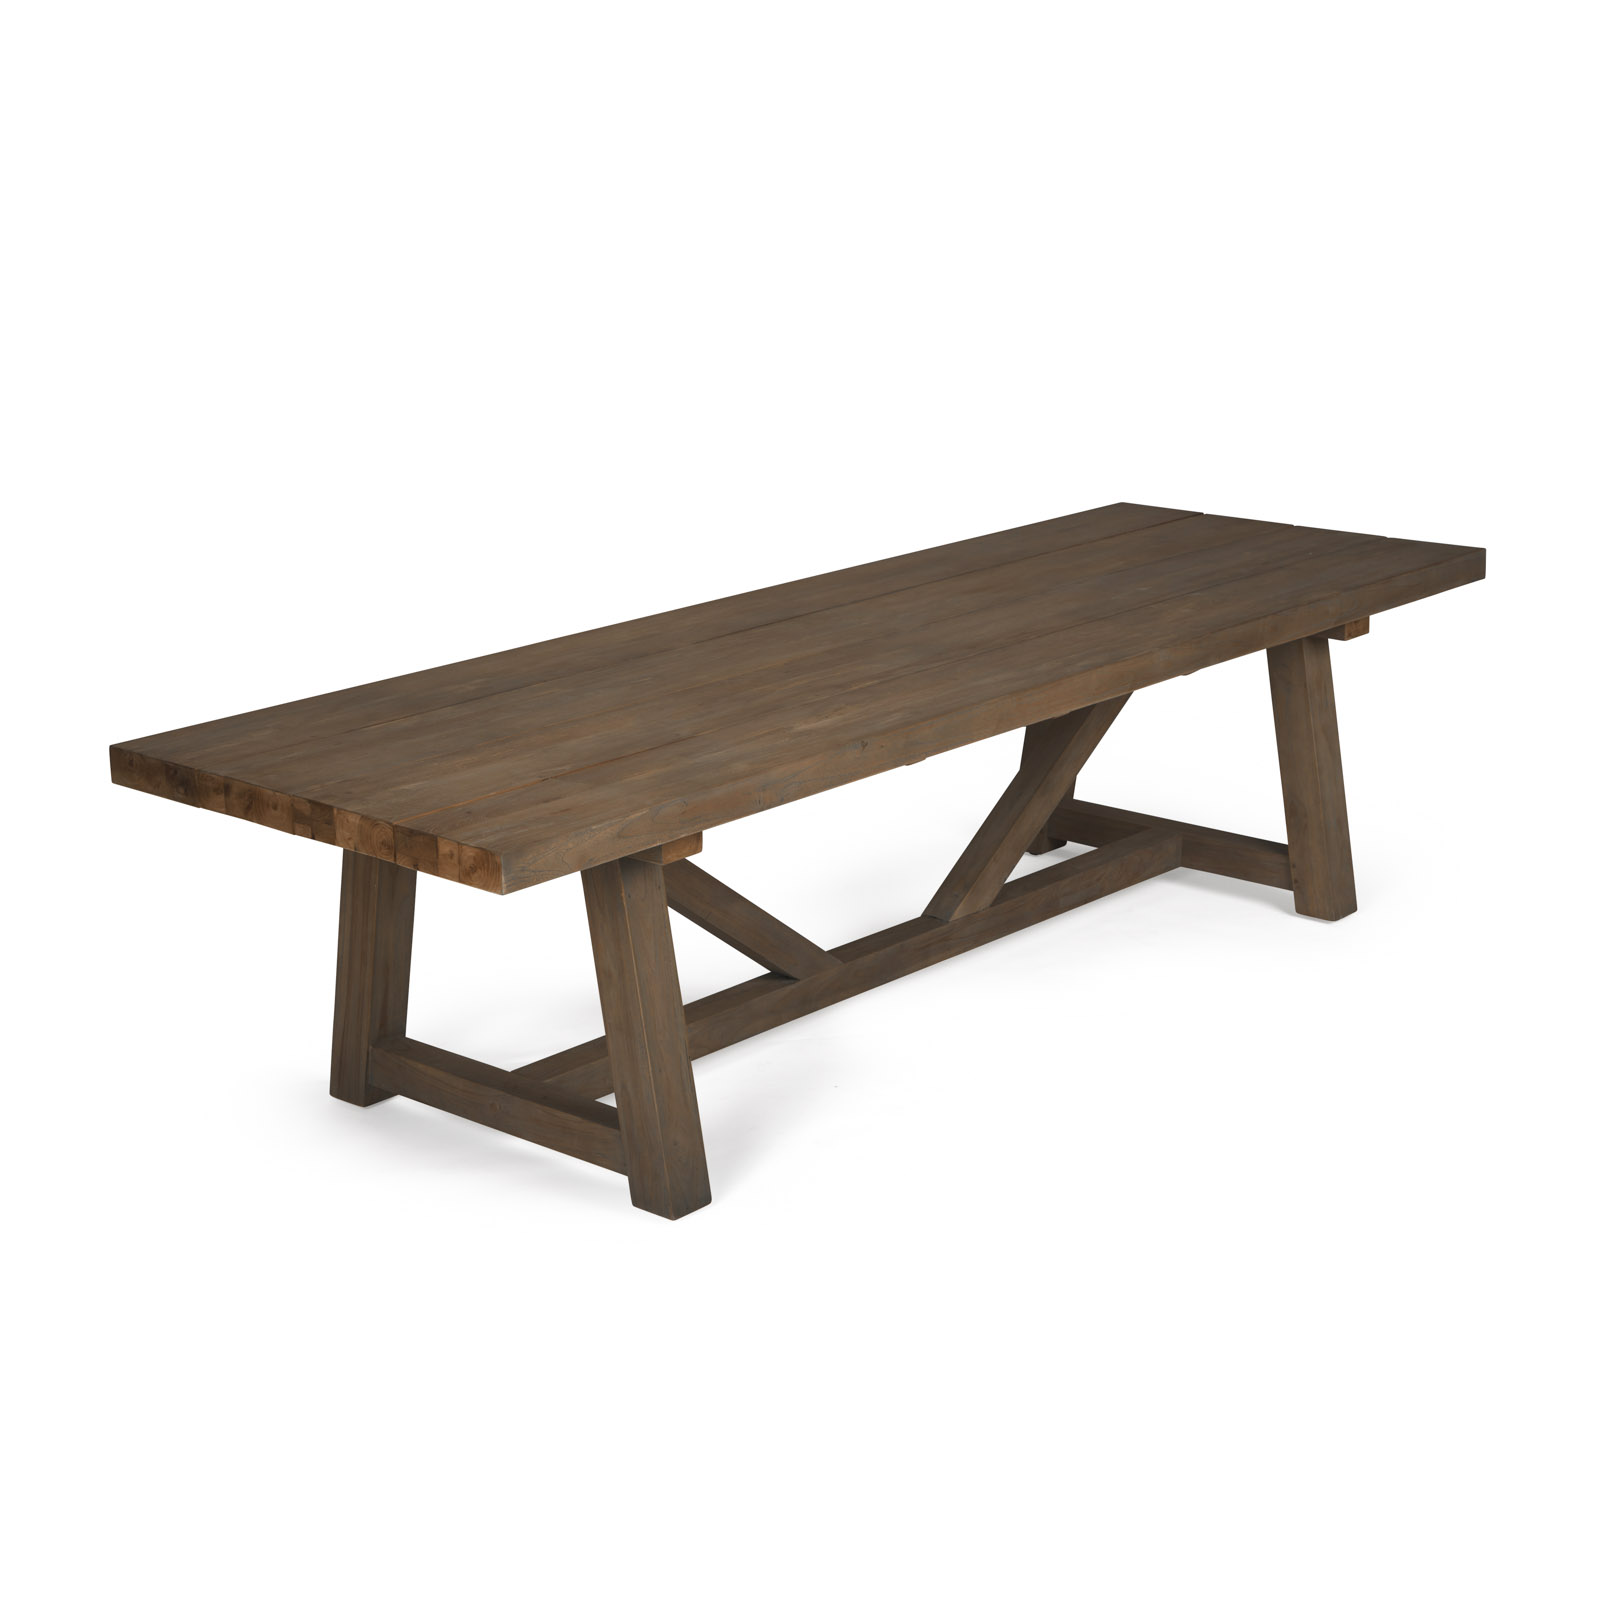 LUPA ROUND OUTDOOR SLATTED RECYCLED TEAK DINING TABLE